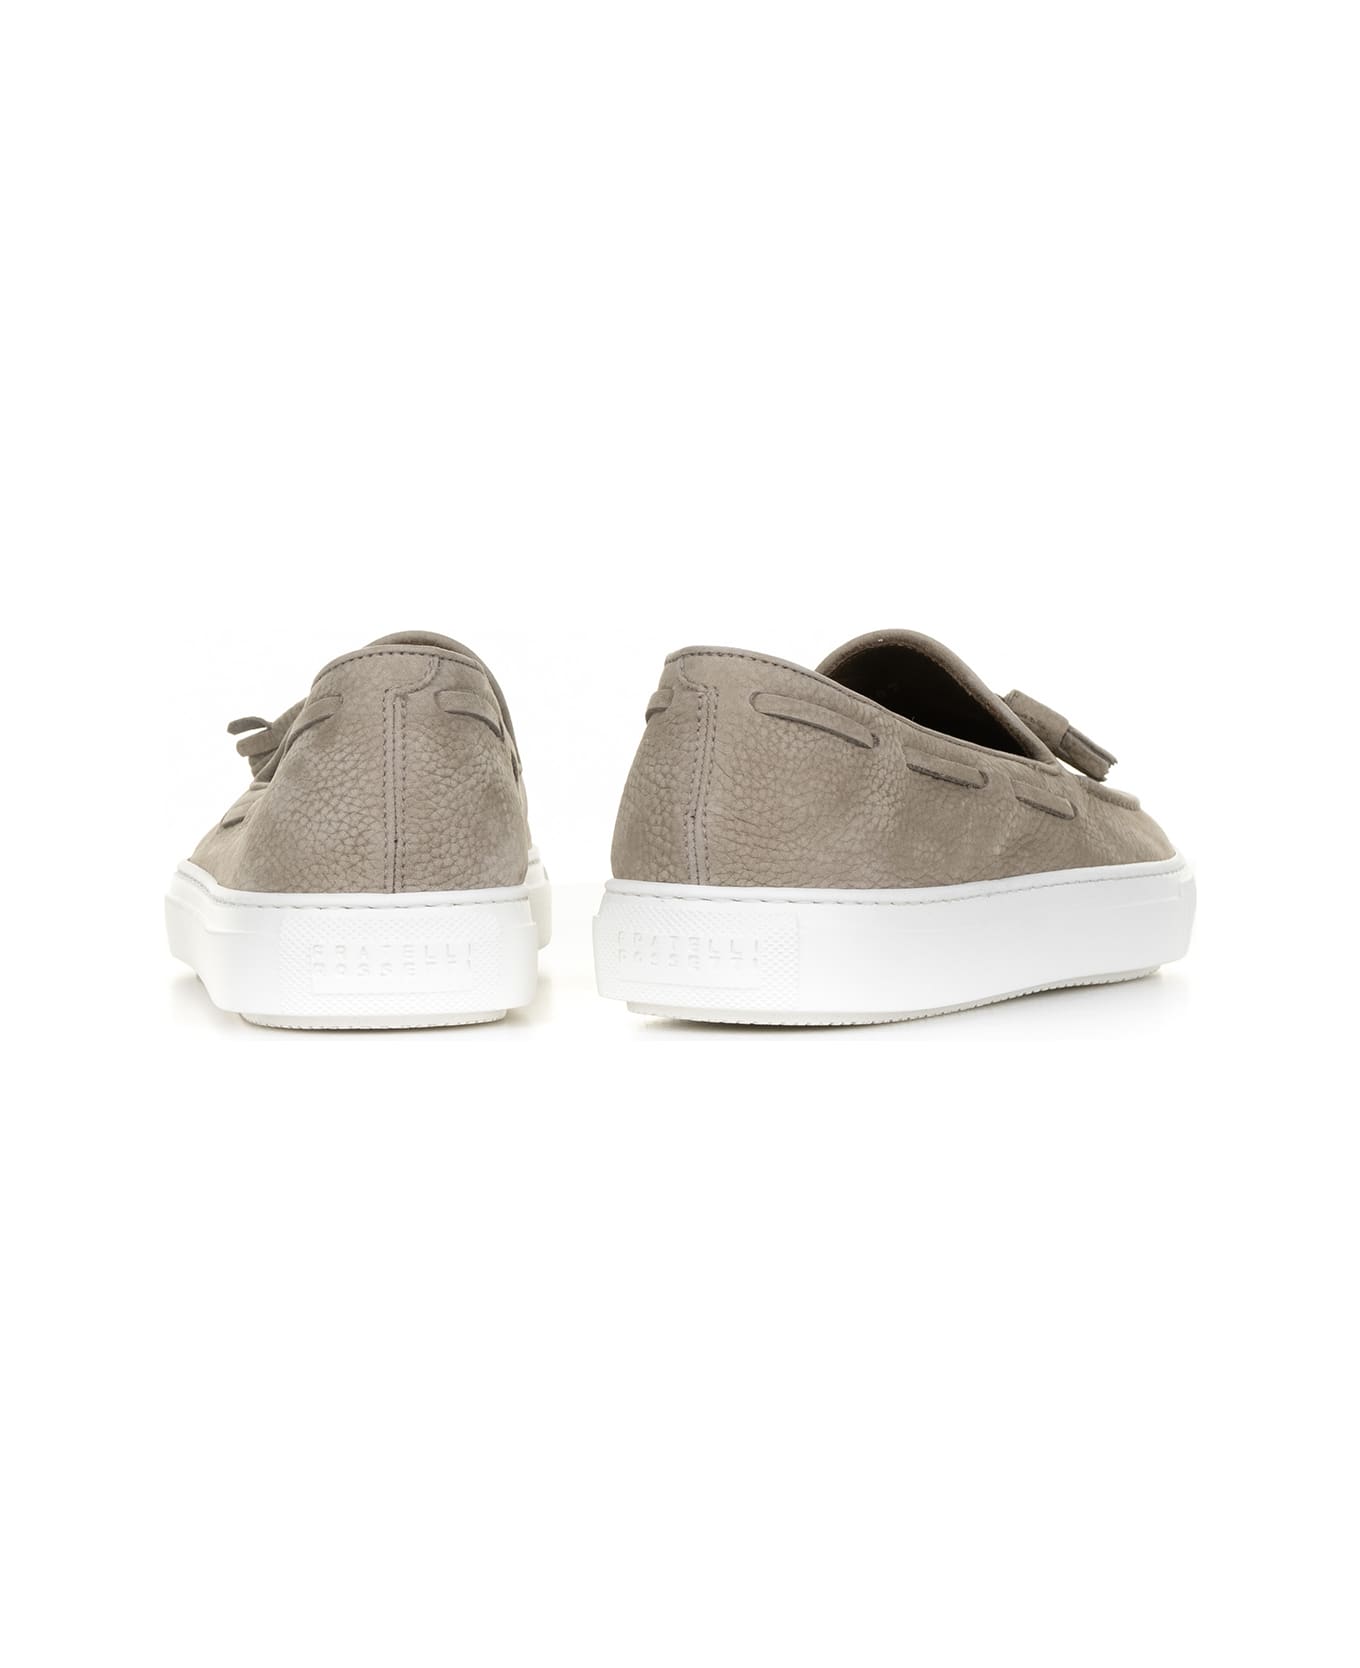 Fratelli Rossetti One Moccasin In Beige Suede And Rubber Sole - CORDA